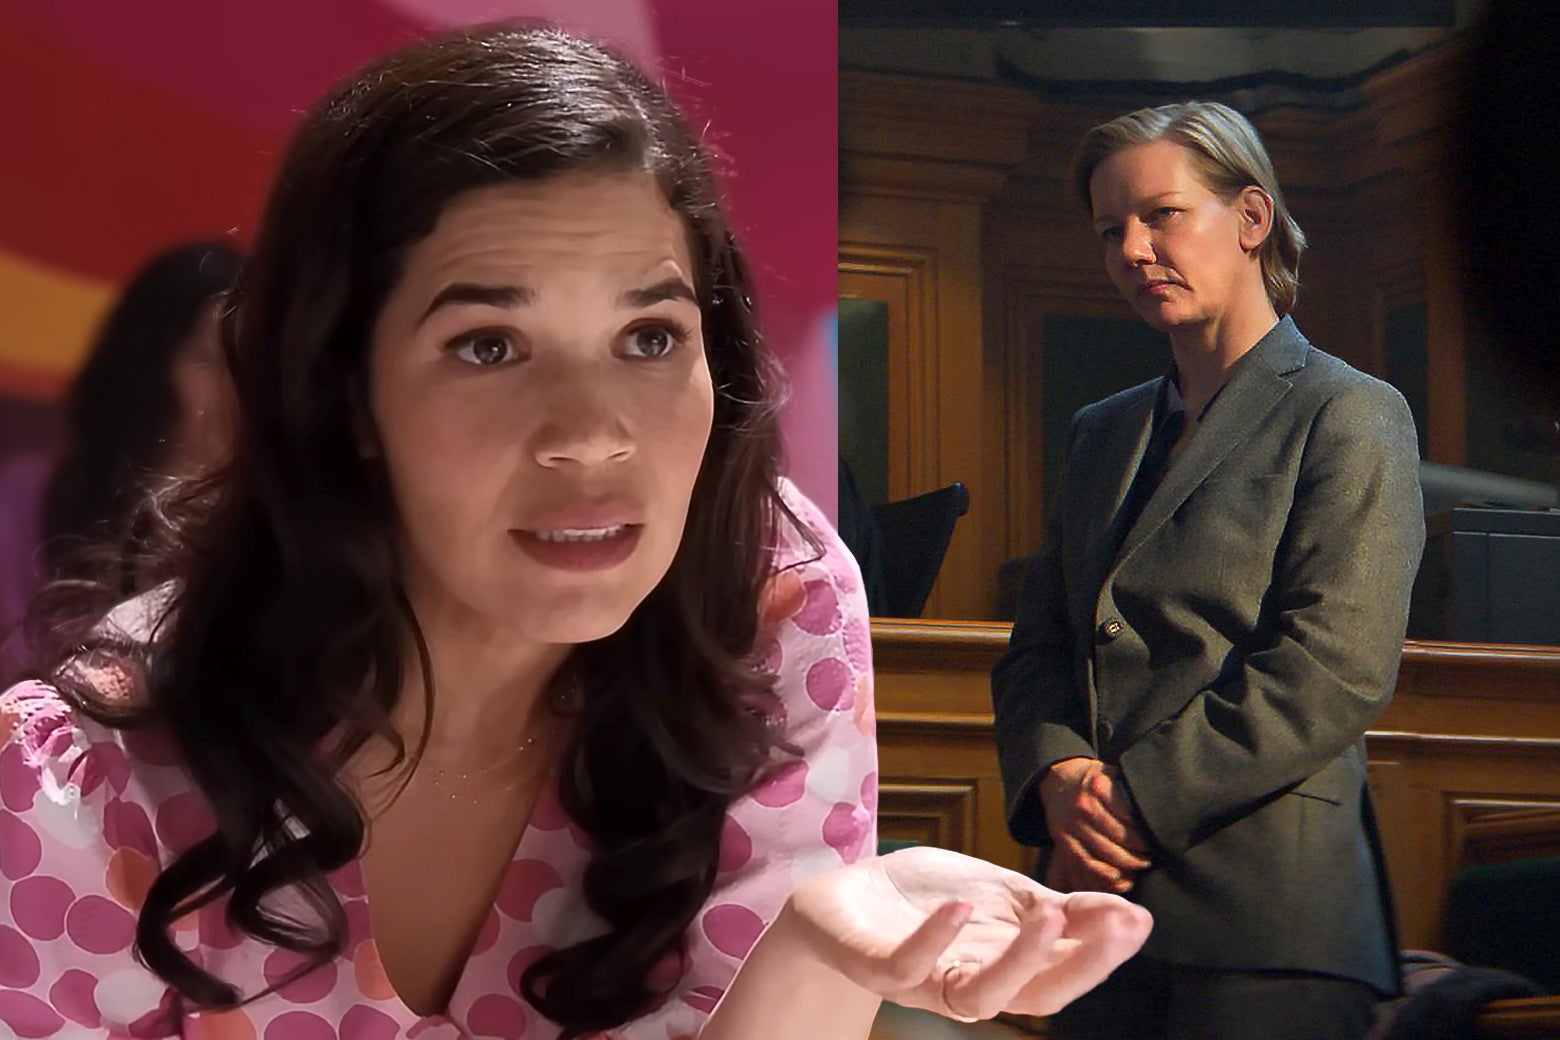 America Ferrera in Barbie giving her feminist monologue and Sandra Huller in Anatomy of a Fall in the courtroom side-by-side. 